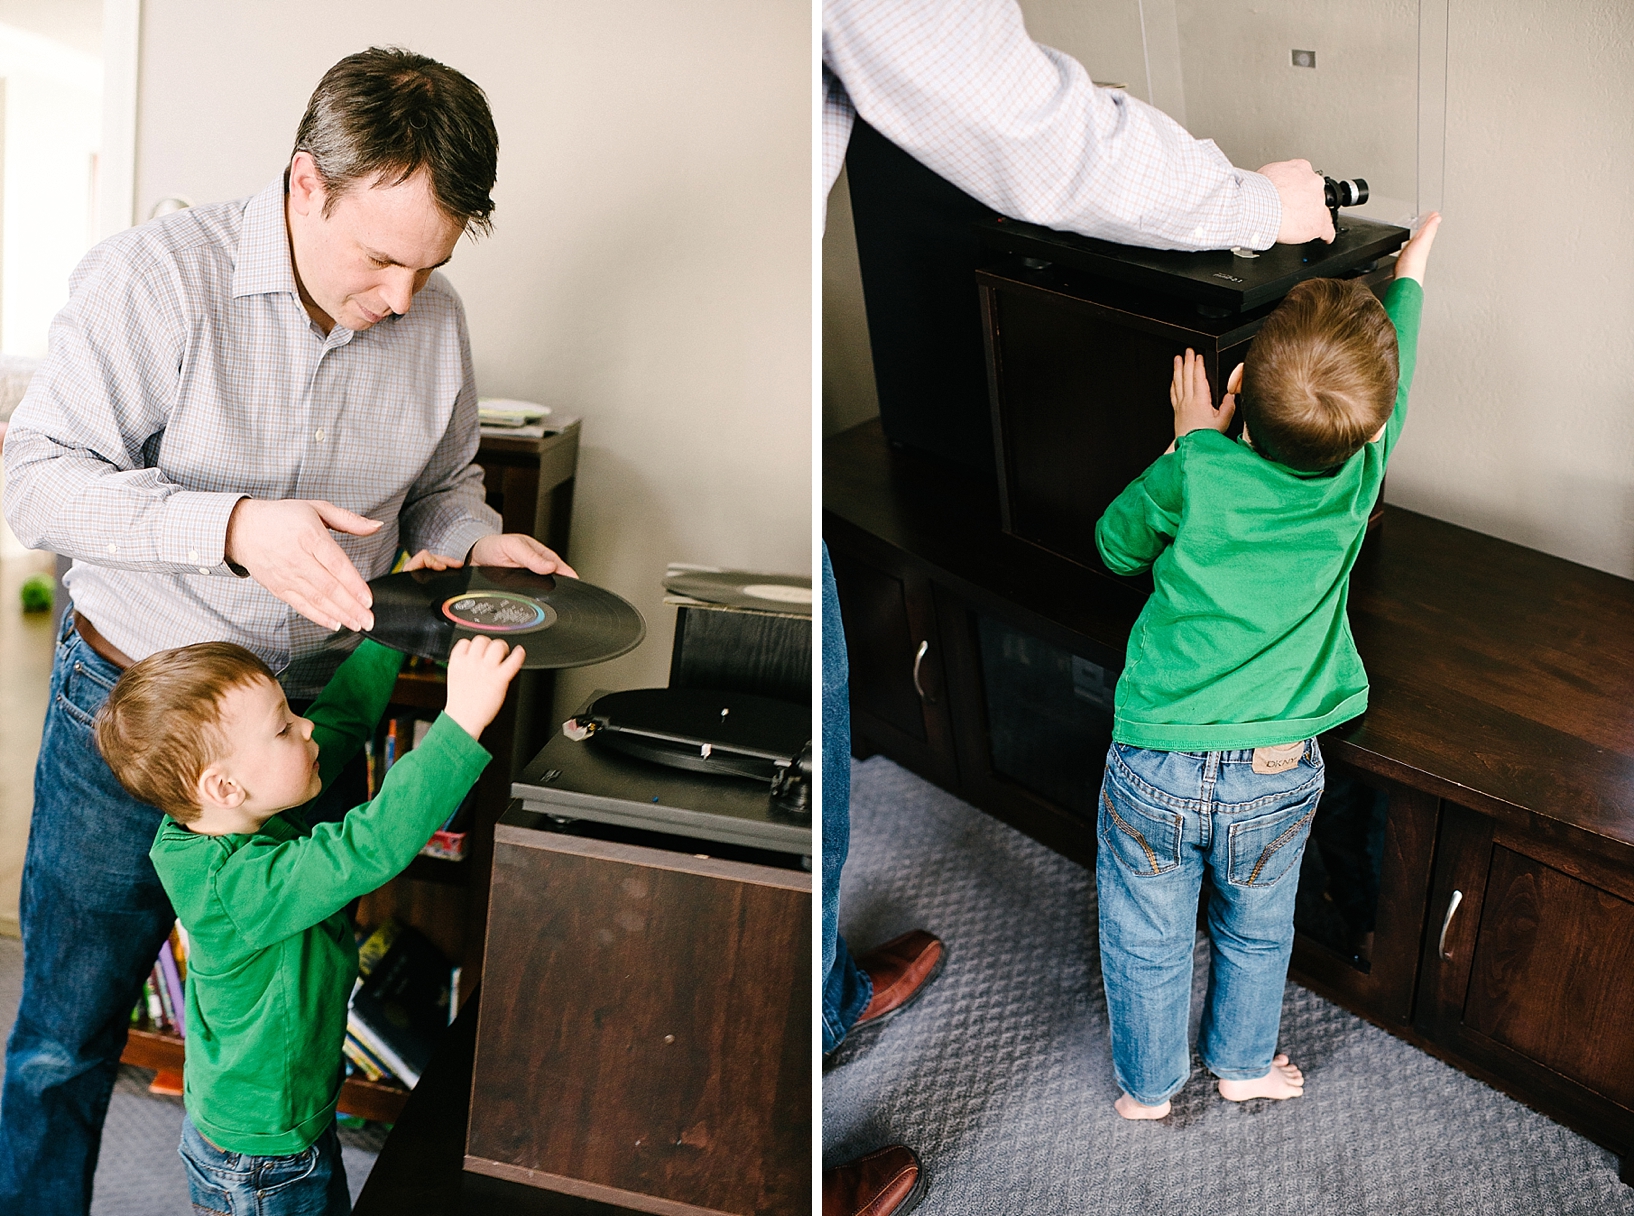 little boy in green shirt helping father put album on record player